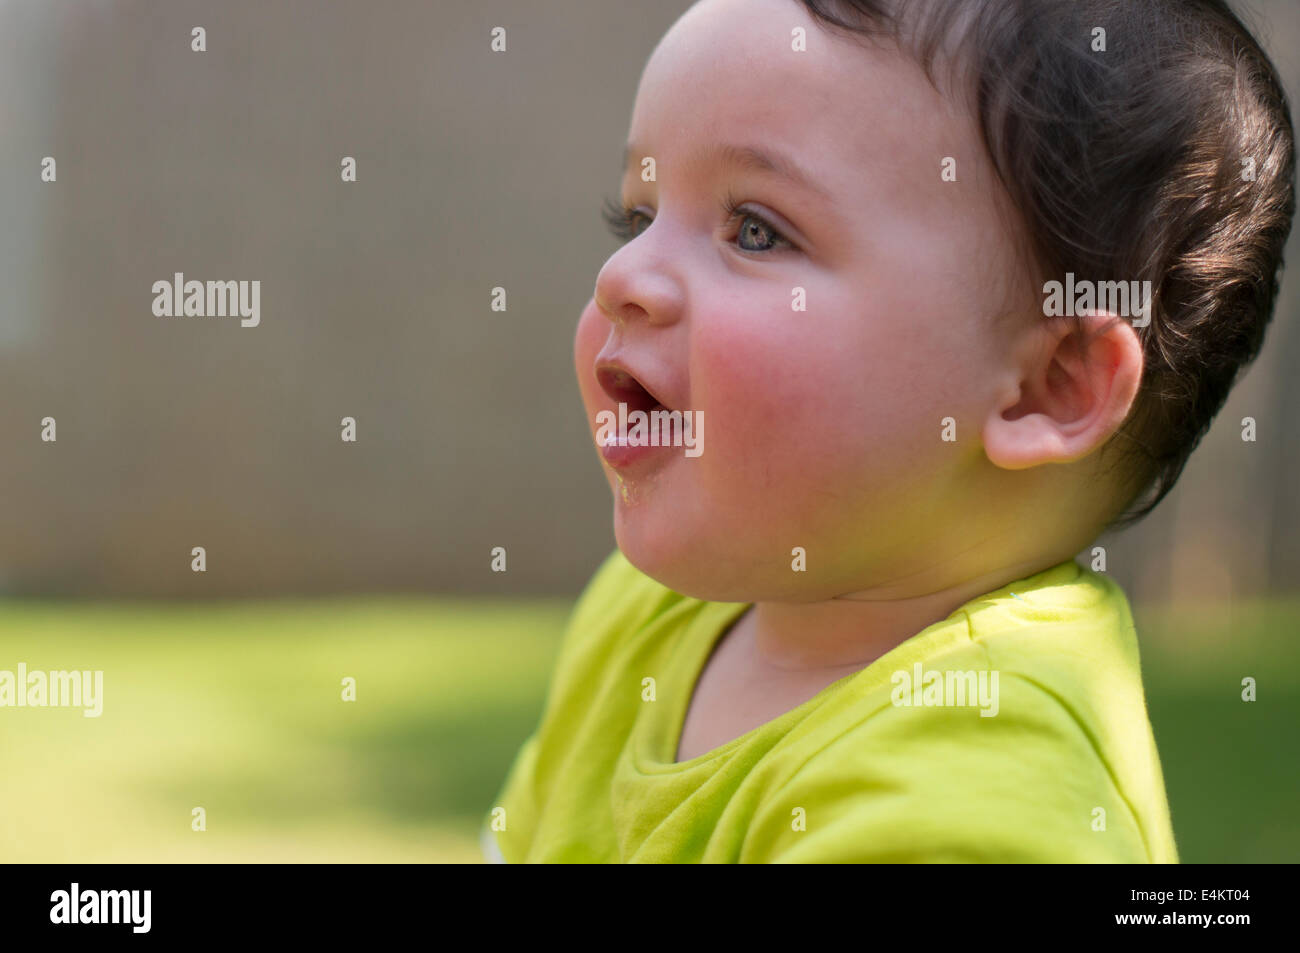 Smiling baby in green t-shirt. Stock Photo